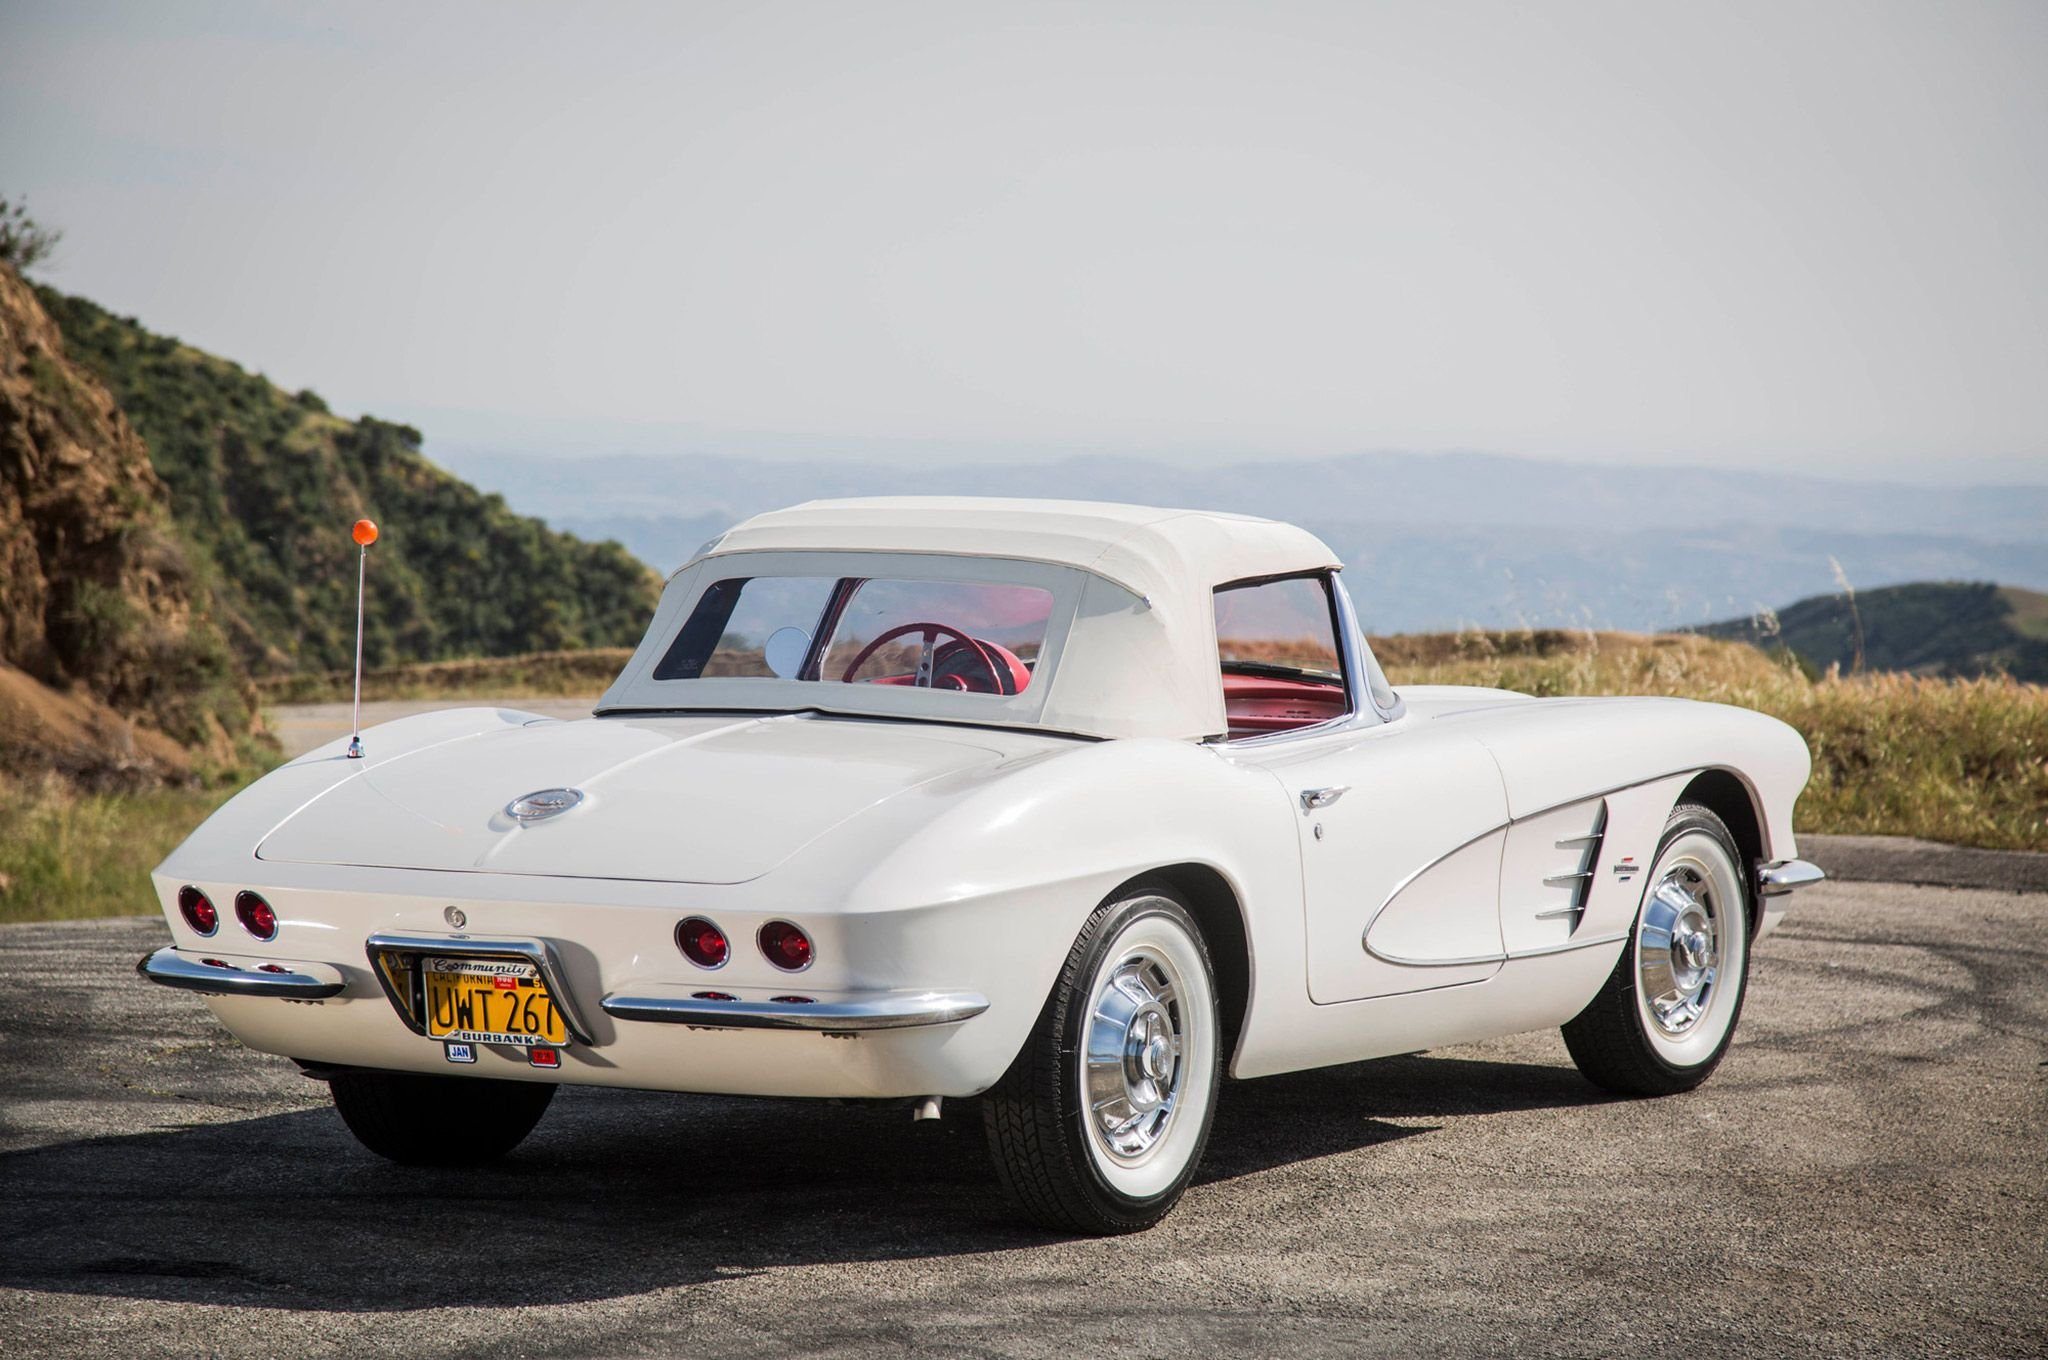 The 1961 Corvette had a completely redesigned back end that included a new "ducktail" design.